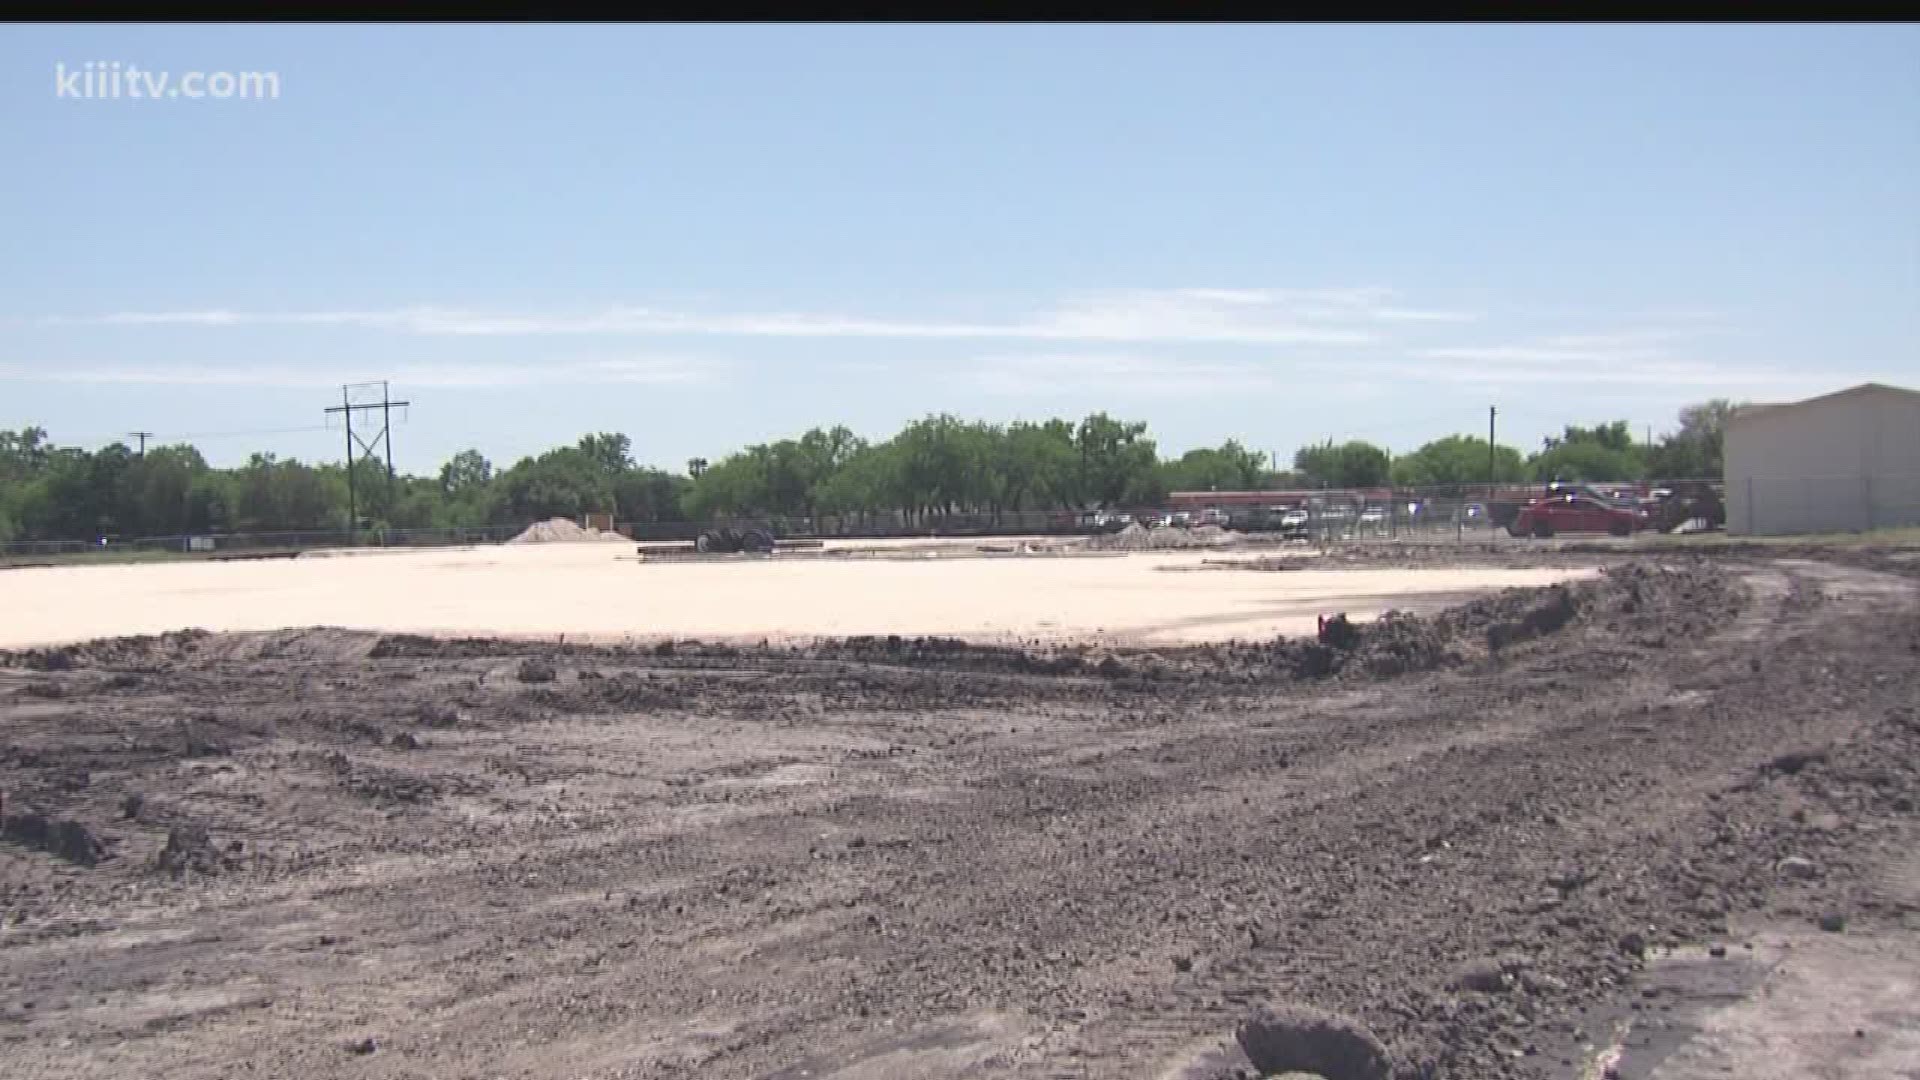 The new Bee County Jail is being built right nextdoor to the old one, a facility that officials said just had to be replaced.